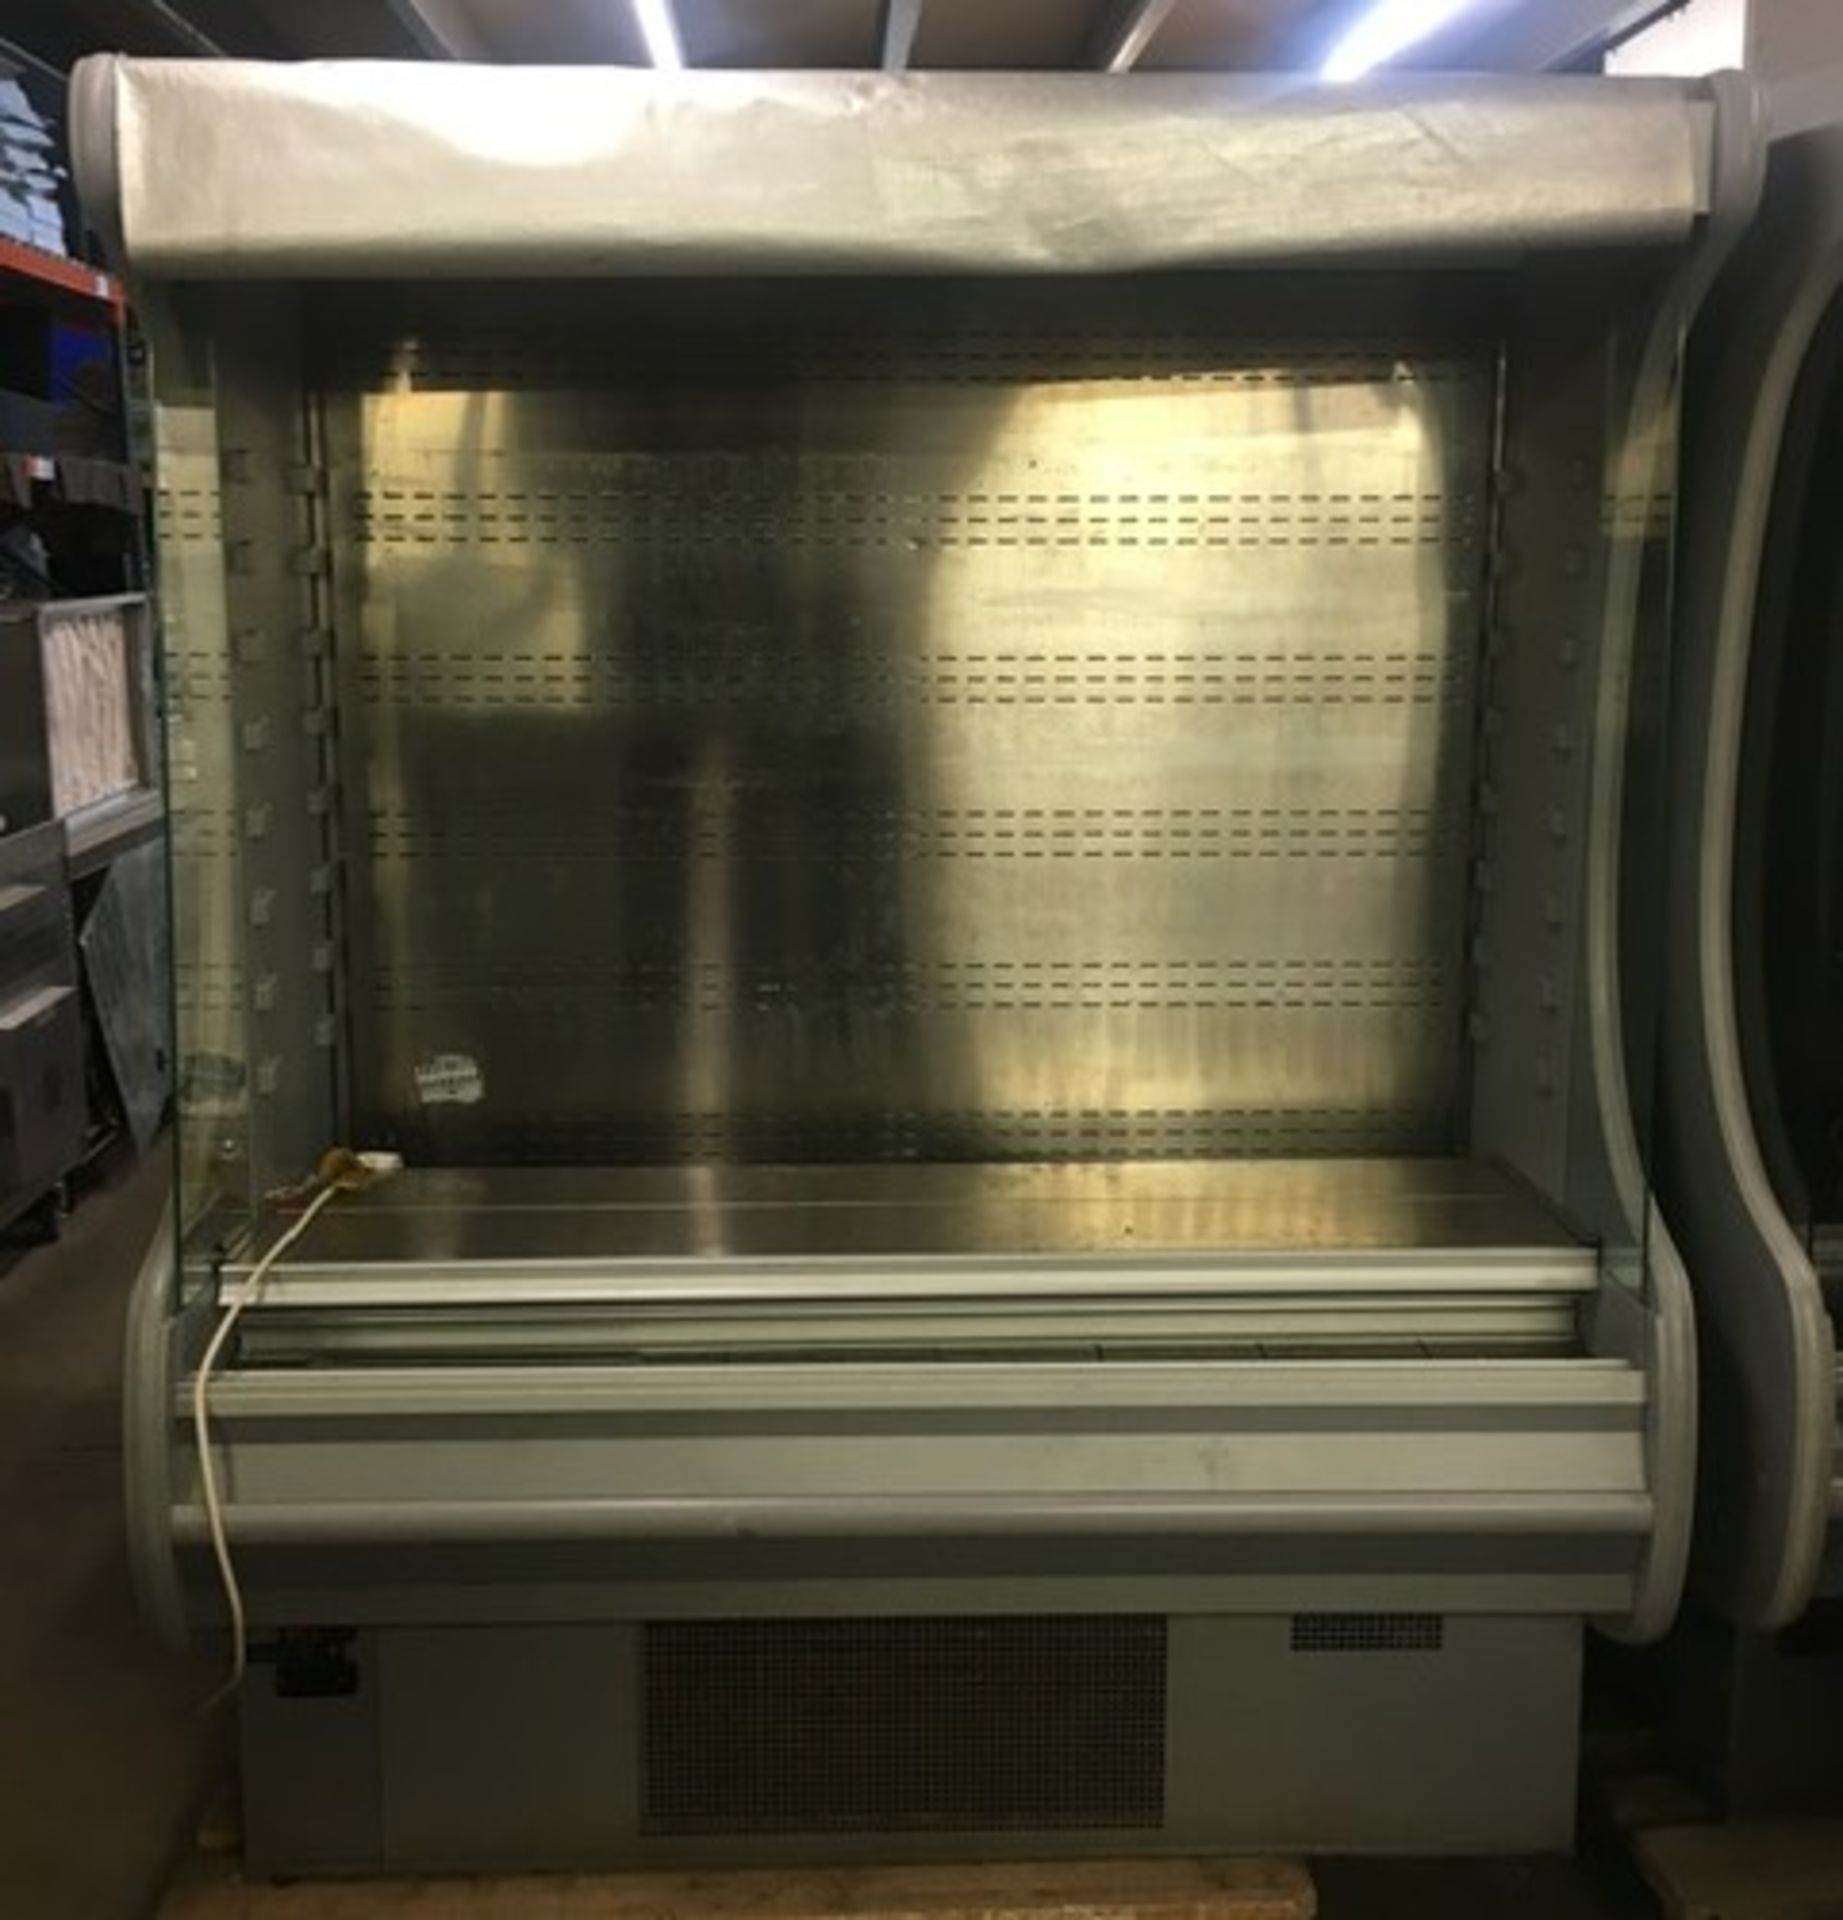 Zoin Artic 150 Chilled Multi Deck Display Chiller - Image 2 of 5